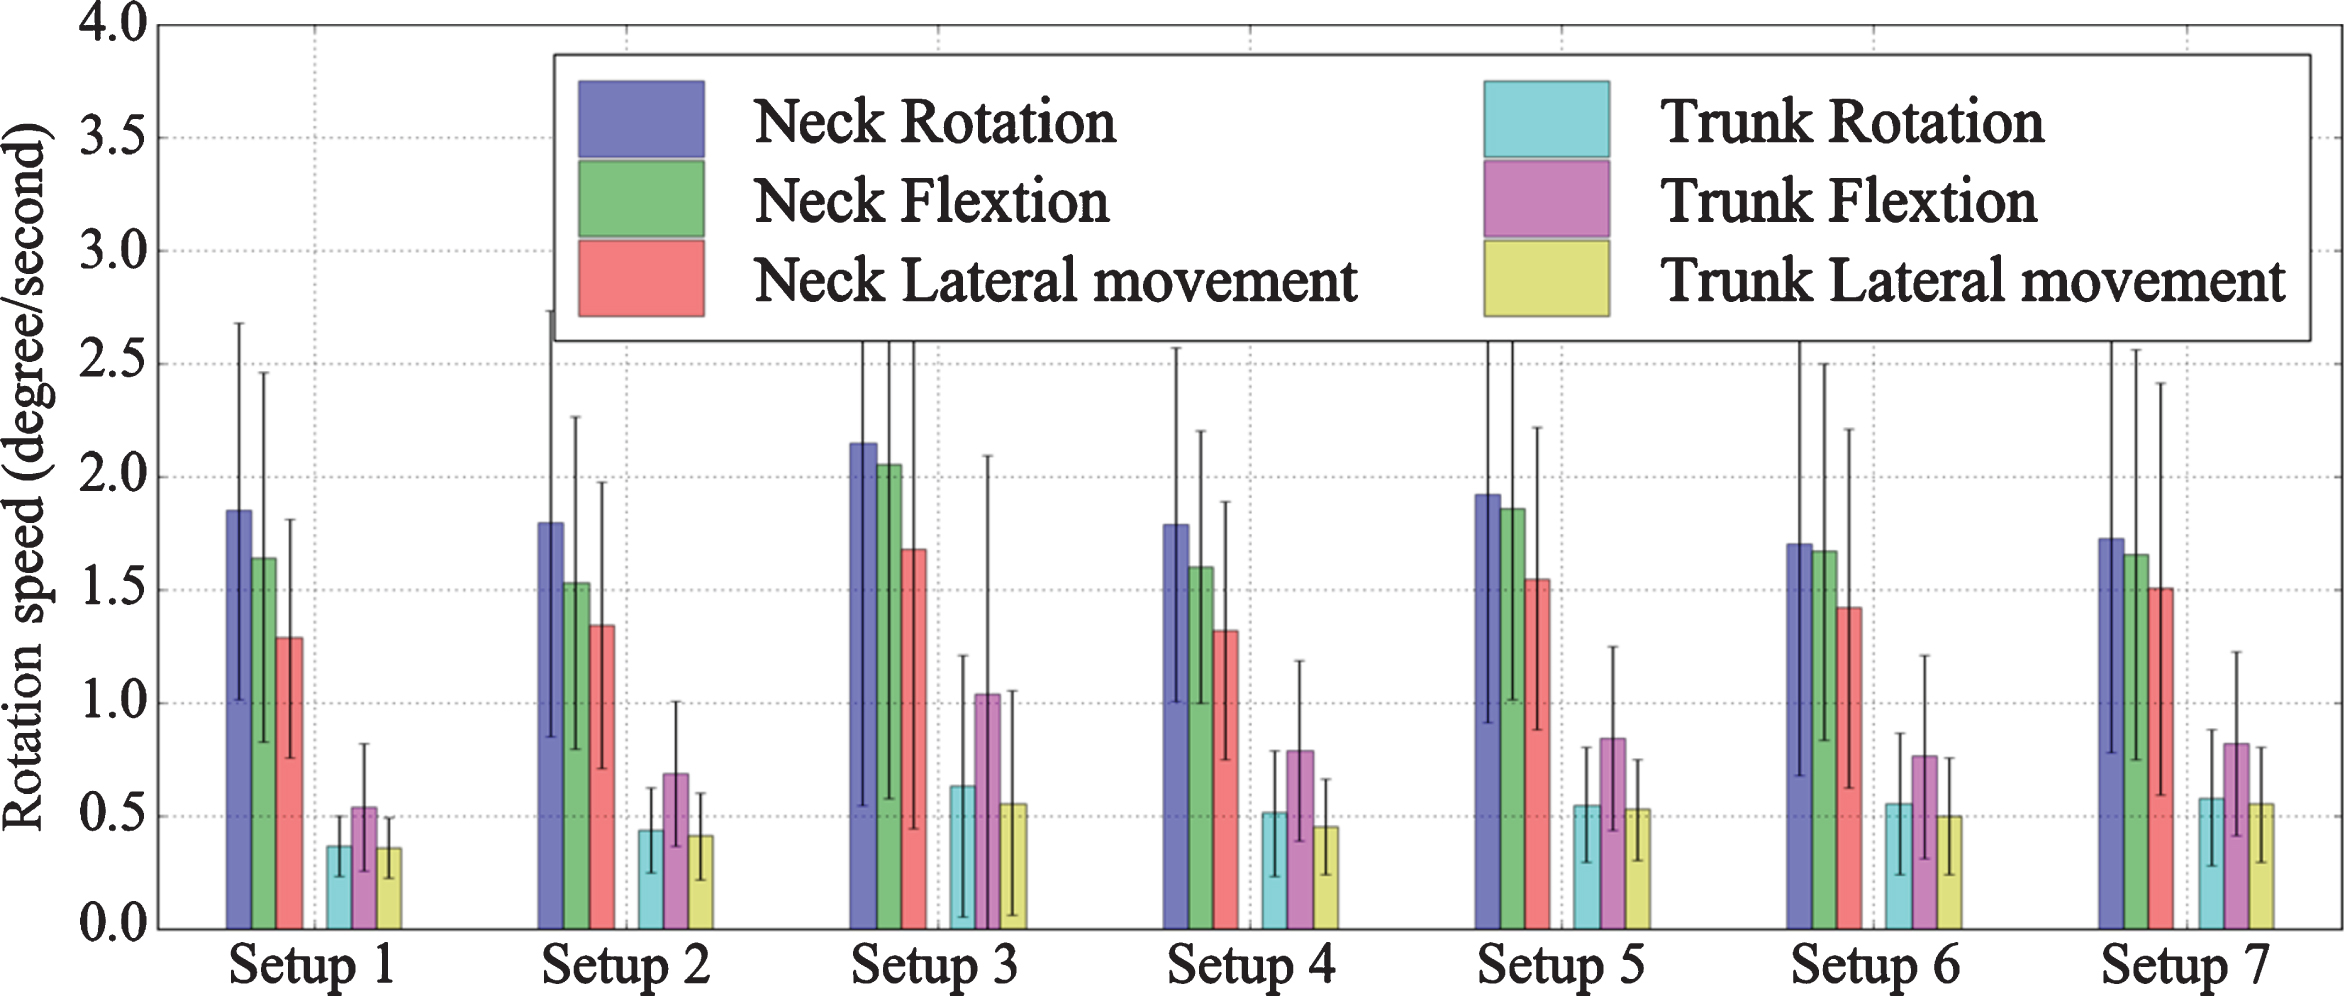 The mean rotation speeds of different parts of body reagrding the 7 illumination setups.